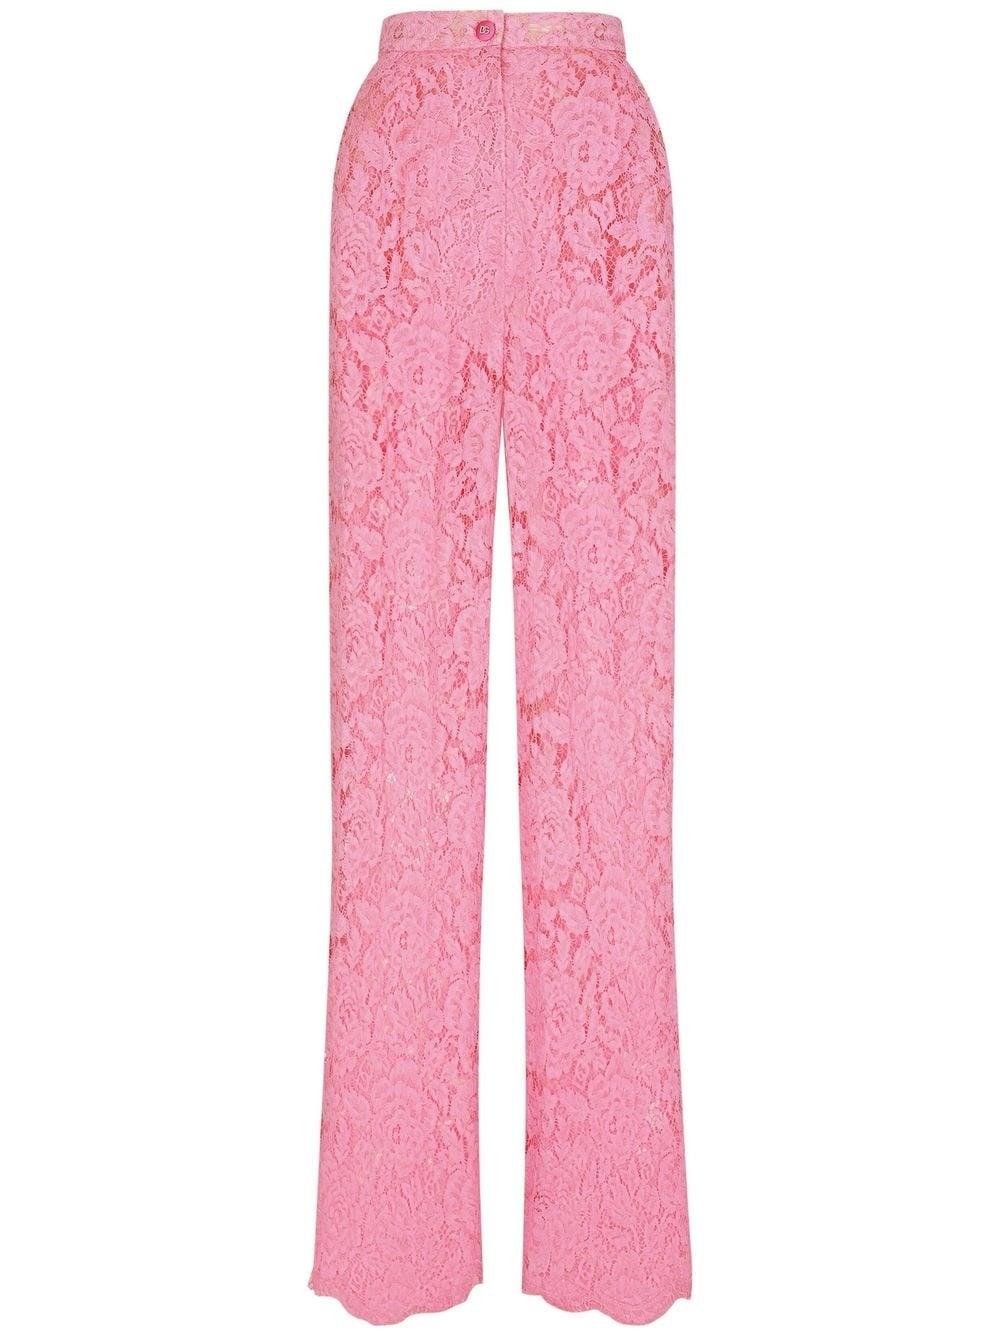 Dolce & Gabbana Floral Lace Tailored Trousers in Pink | Lyst